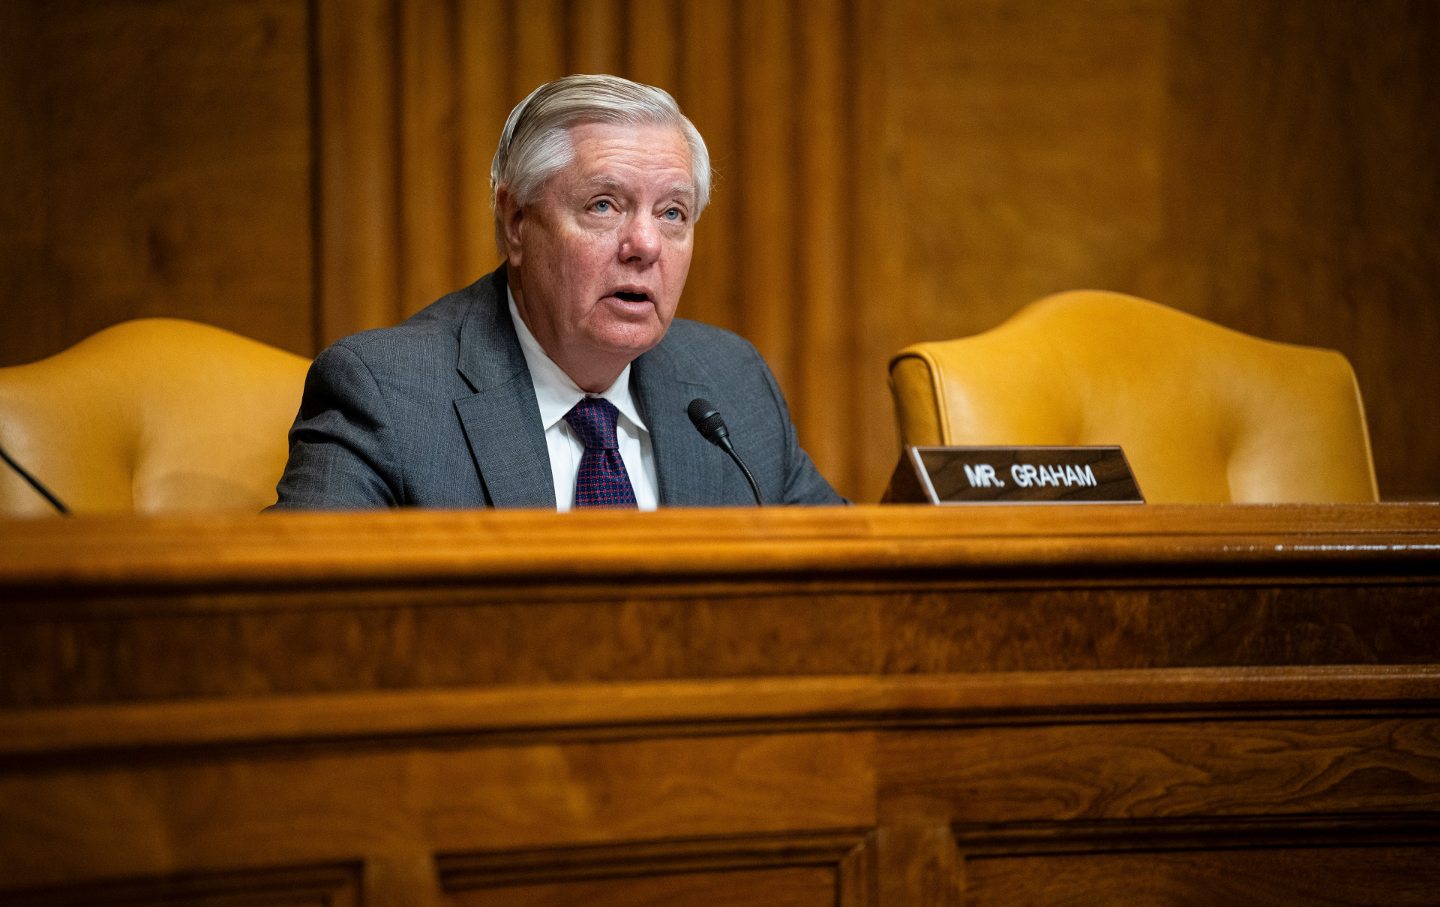 Sen. Lindsey Graham at a dias in front of a nameplate.